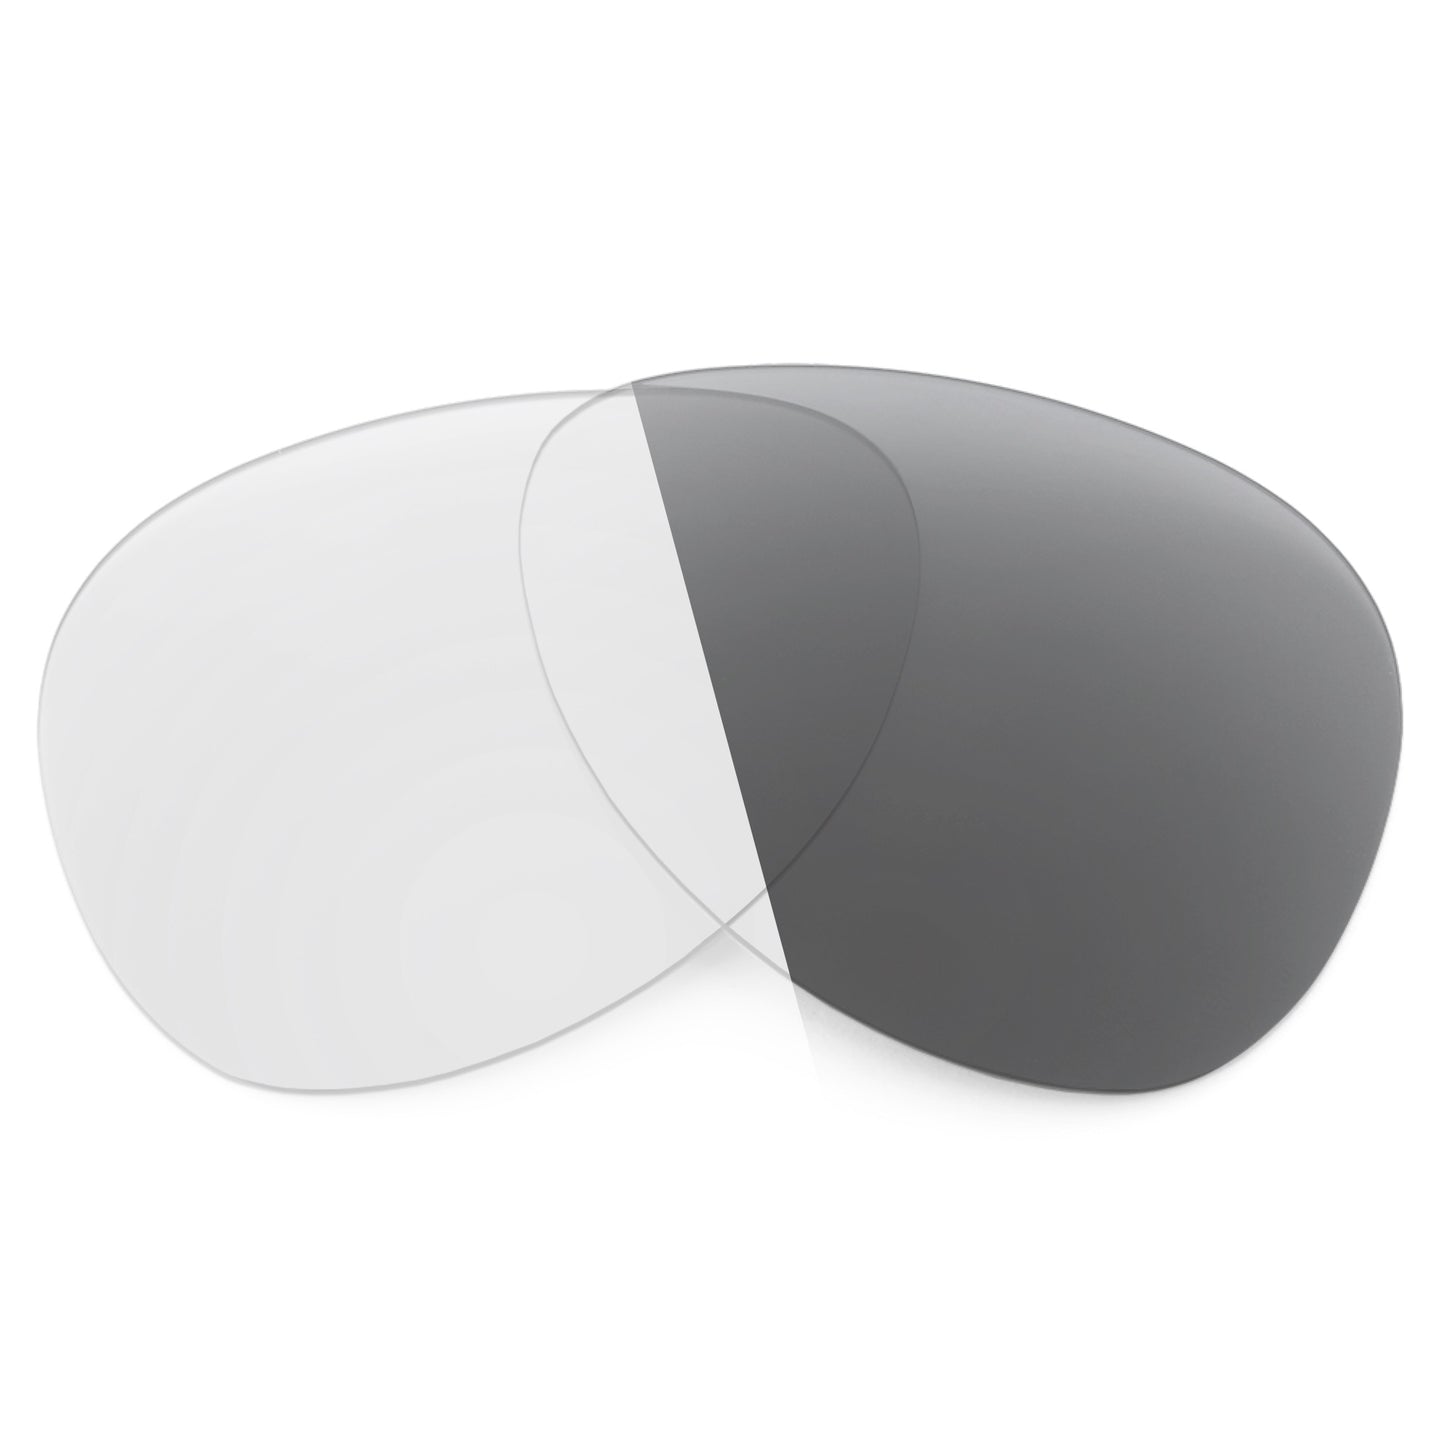 Revant replacement lenses for Ray-Ban Cockpit RB3362 59mm Non-Polarized Adapt Gray Photochromic